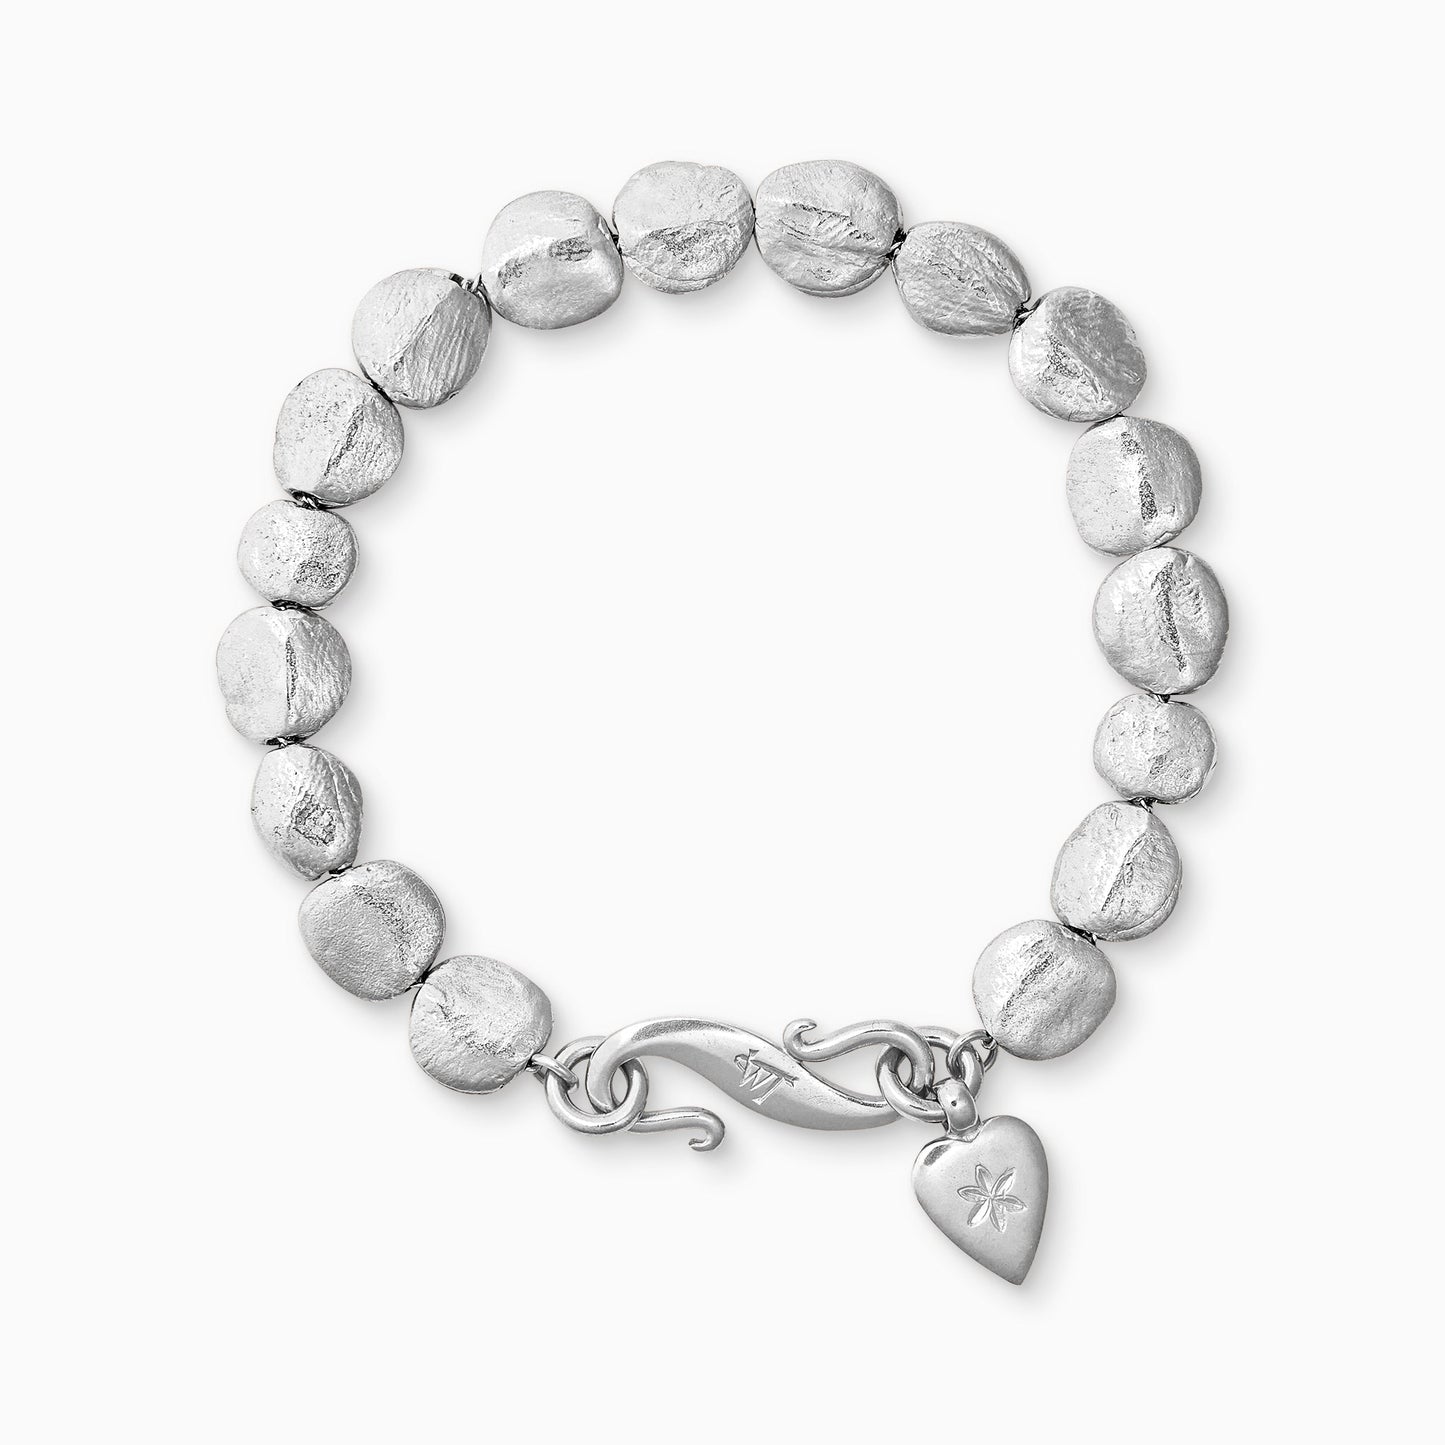 A recycled Silver bracelet of handmade textured beads with a smooth heart shaped charm engraved with a 6 petal flower and our signature ’S’ clasp. Bracelet length 210mm. Beads varying from approximately 7mm x 4mm to 10mm x 11mm